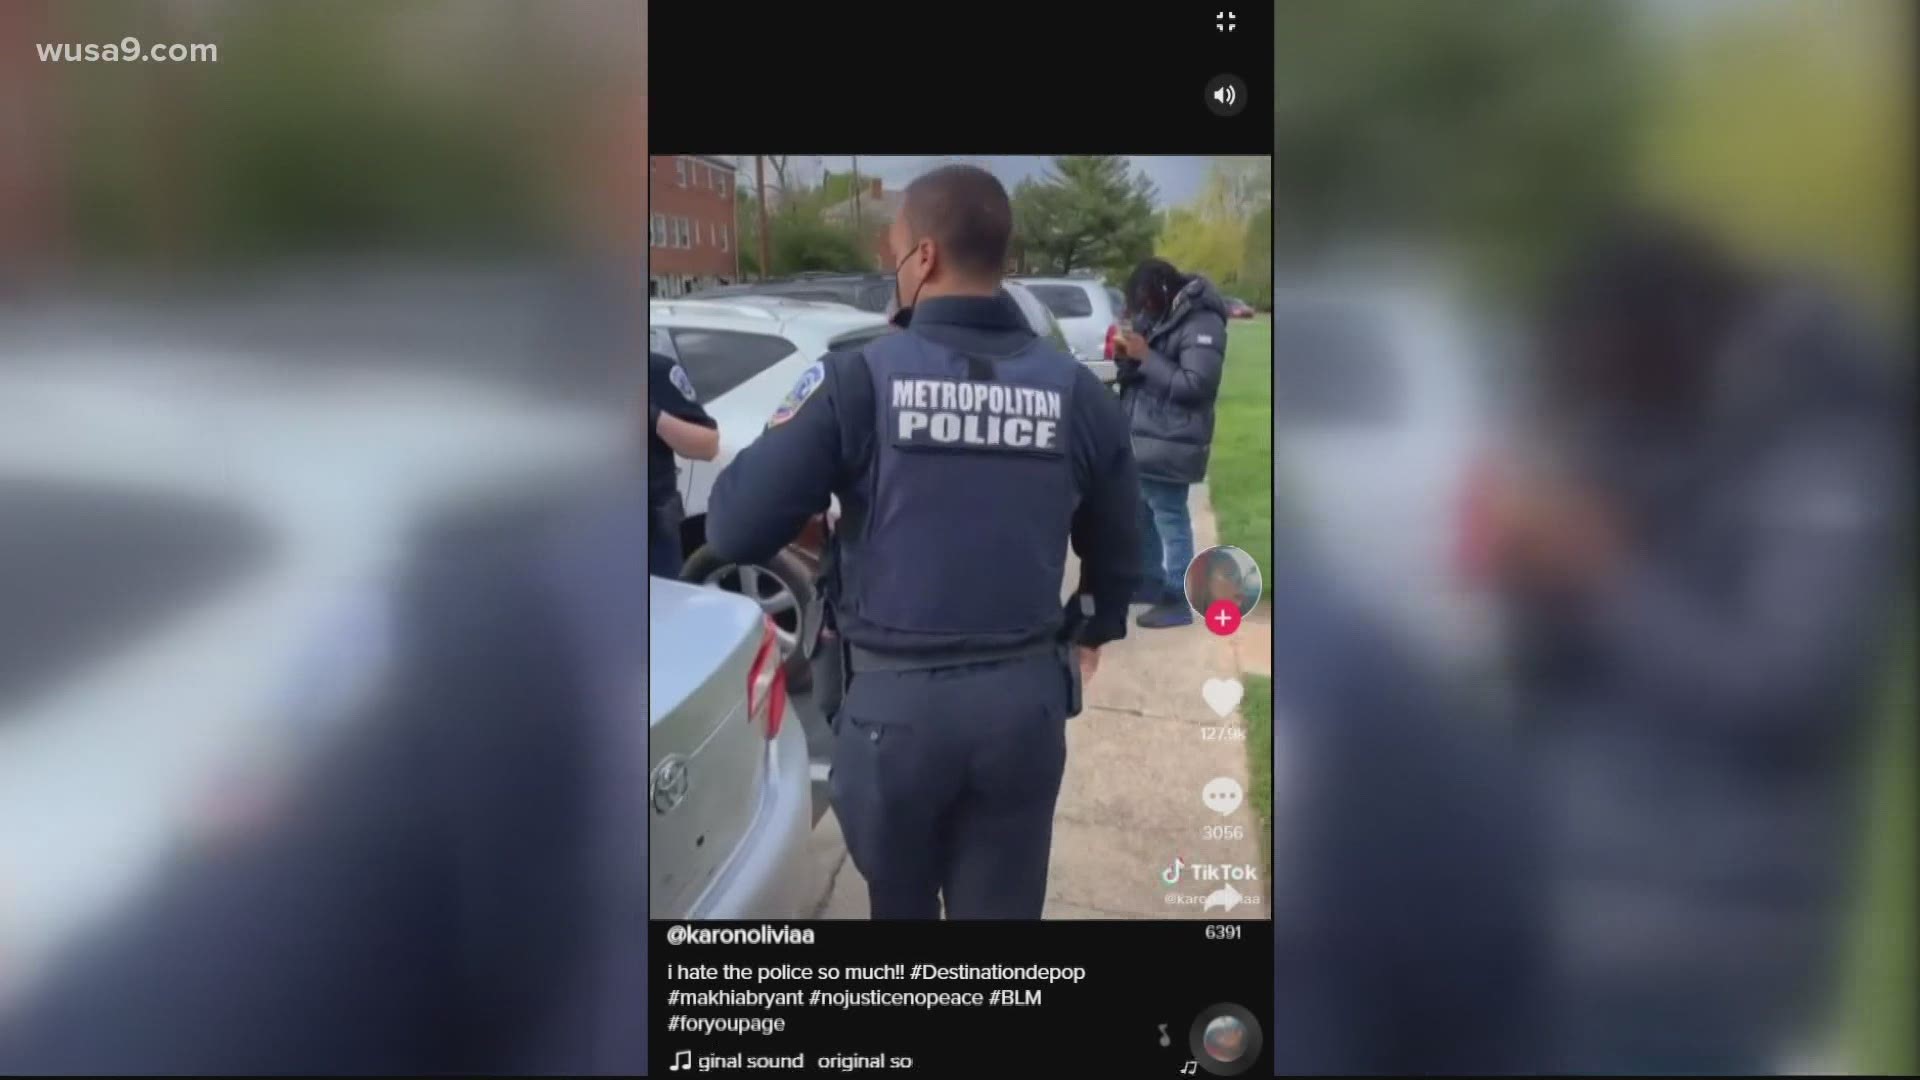 DC police investigating TikTok video of officer's comment on Ma'Khia Bryant  | wusa9.com